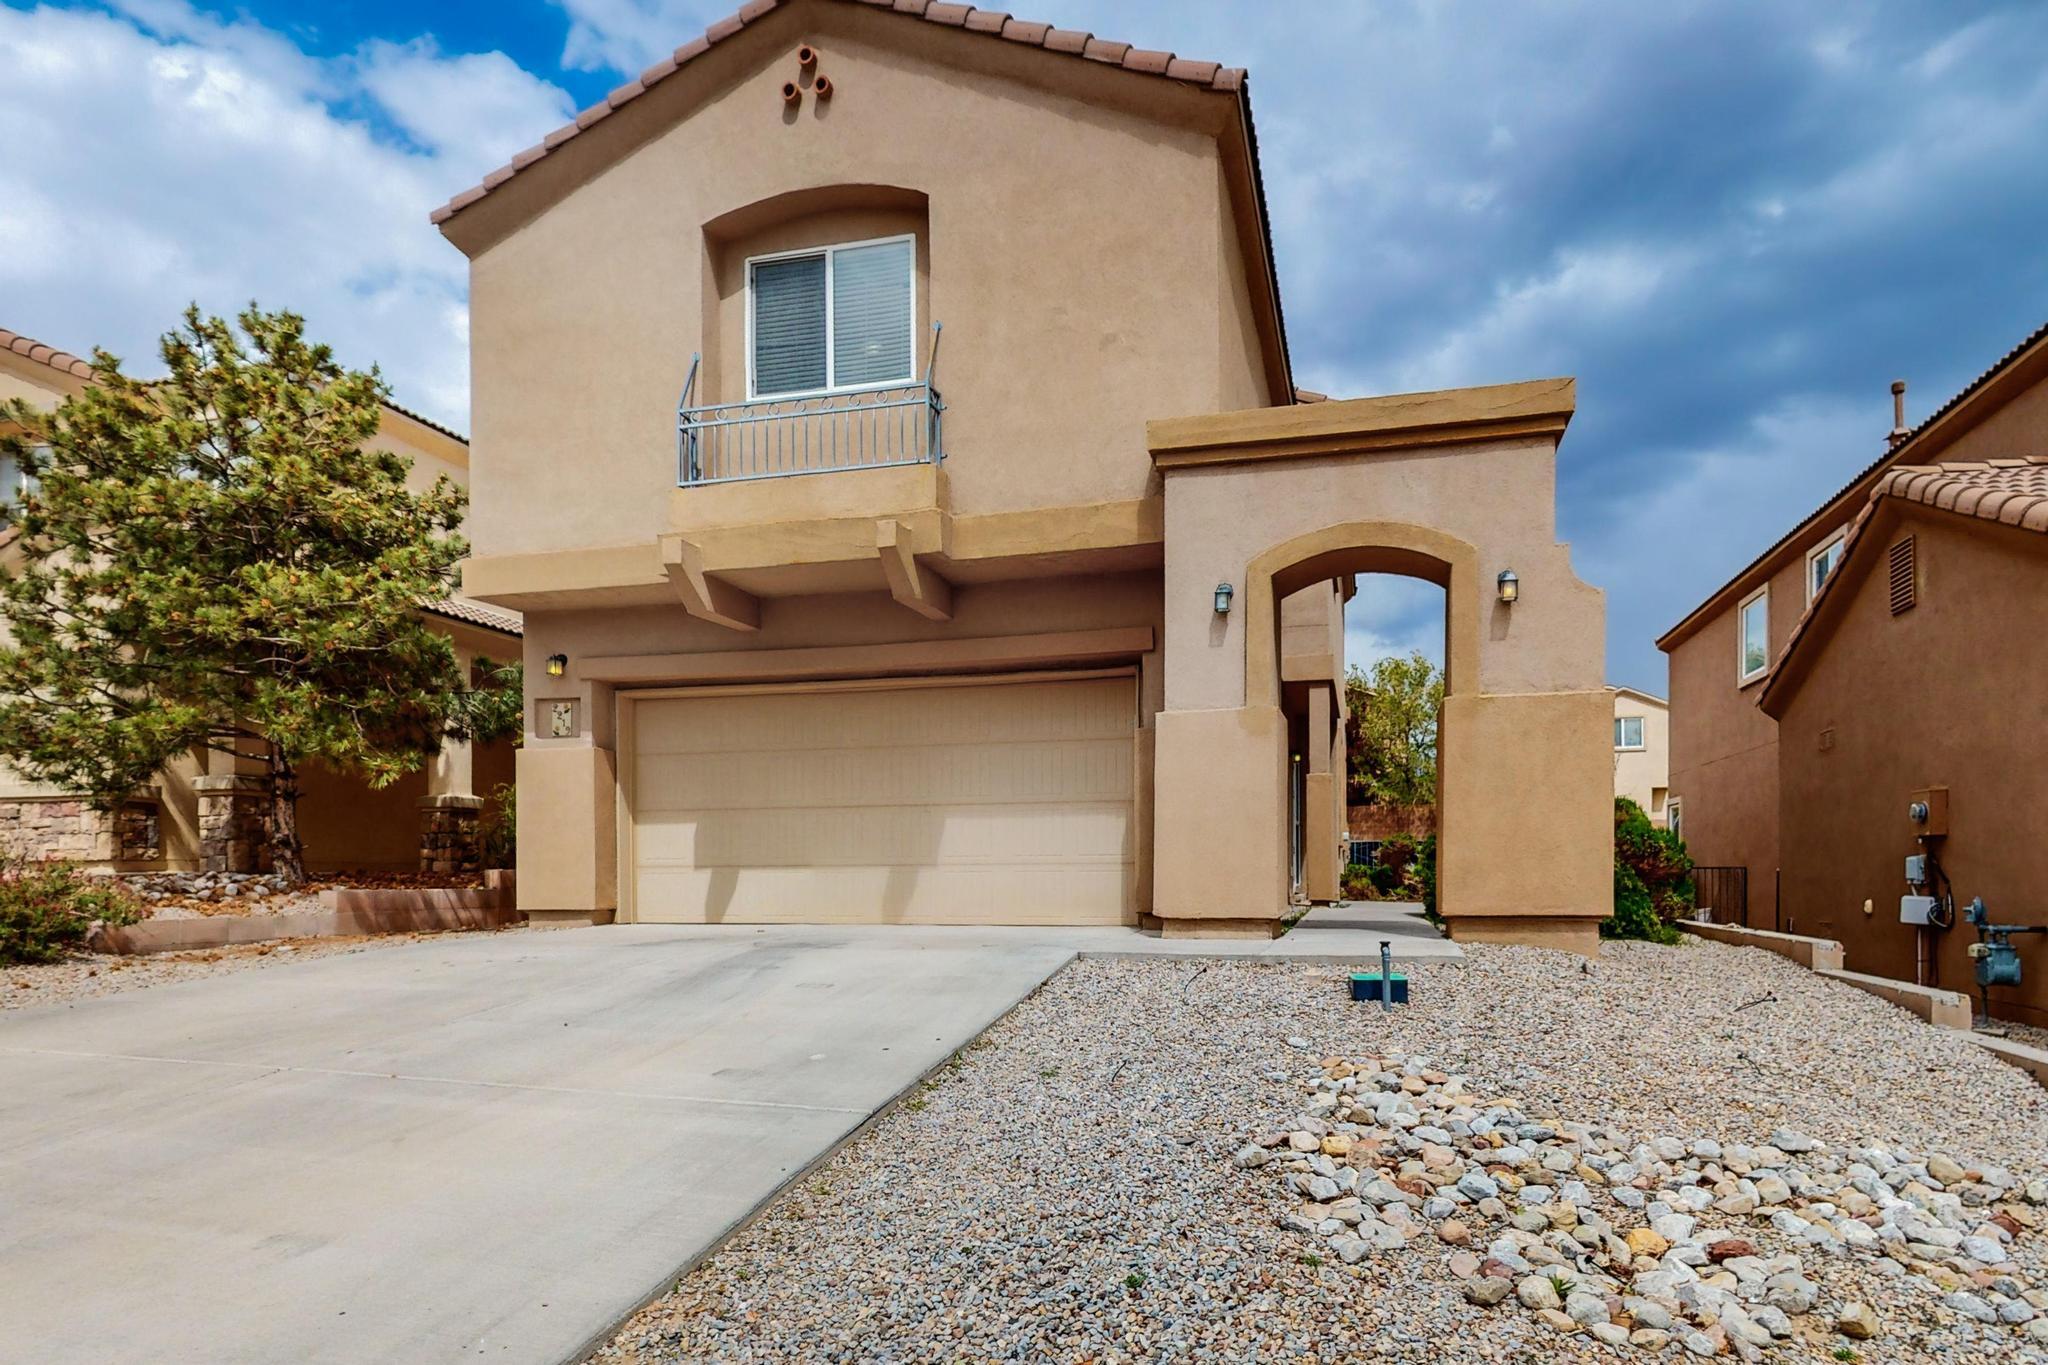 Located in Cabezon, with one of the smallest PID's!  Cute and cozy with a soothing color scheme, this home has Refrigerated Air, Tile flooring and carpet. Kitchen Island, Upgraded fixtures, covered patio. Close to shopping, restaurants, Rust Medical Center, Intel. You won't want to miss it!